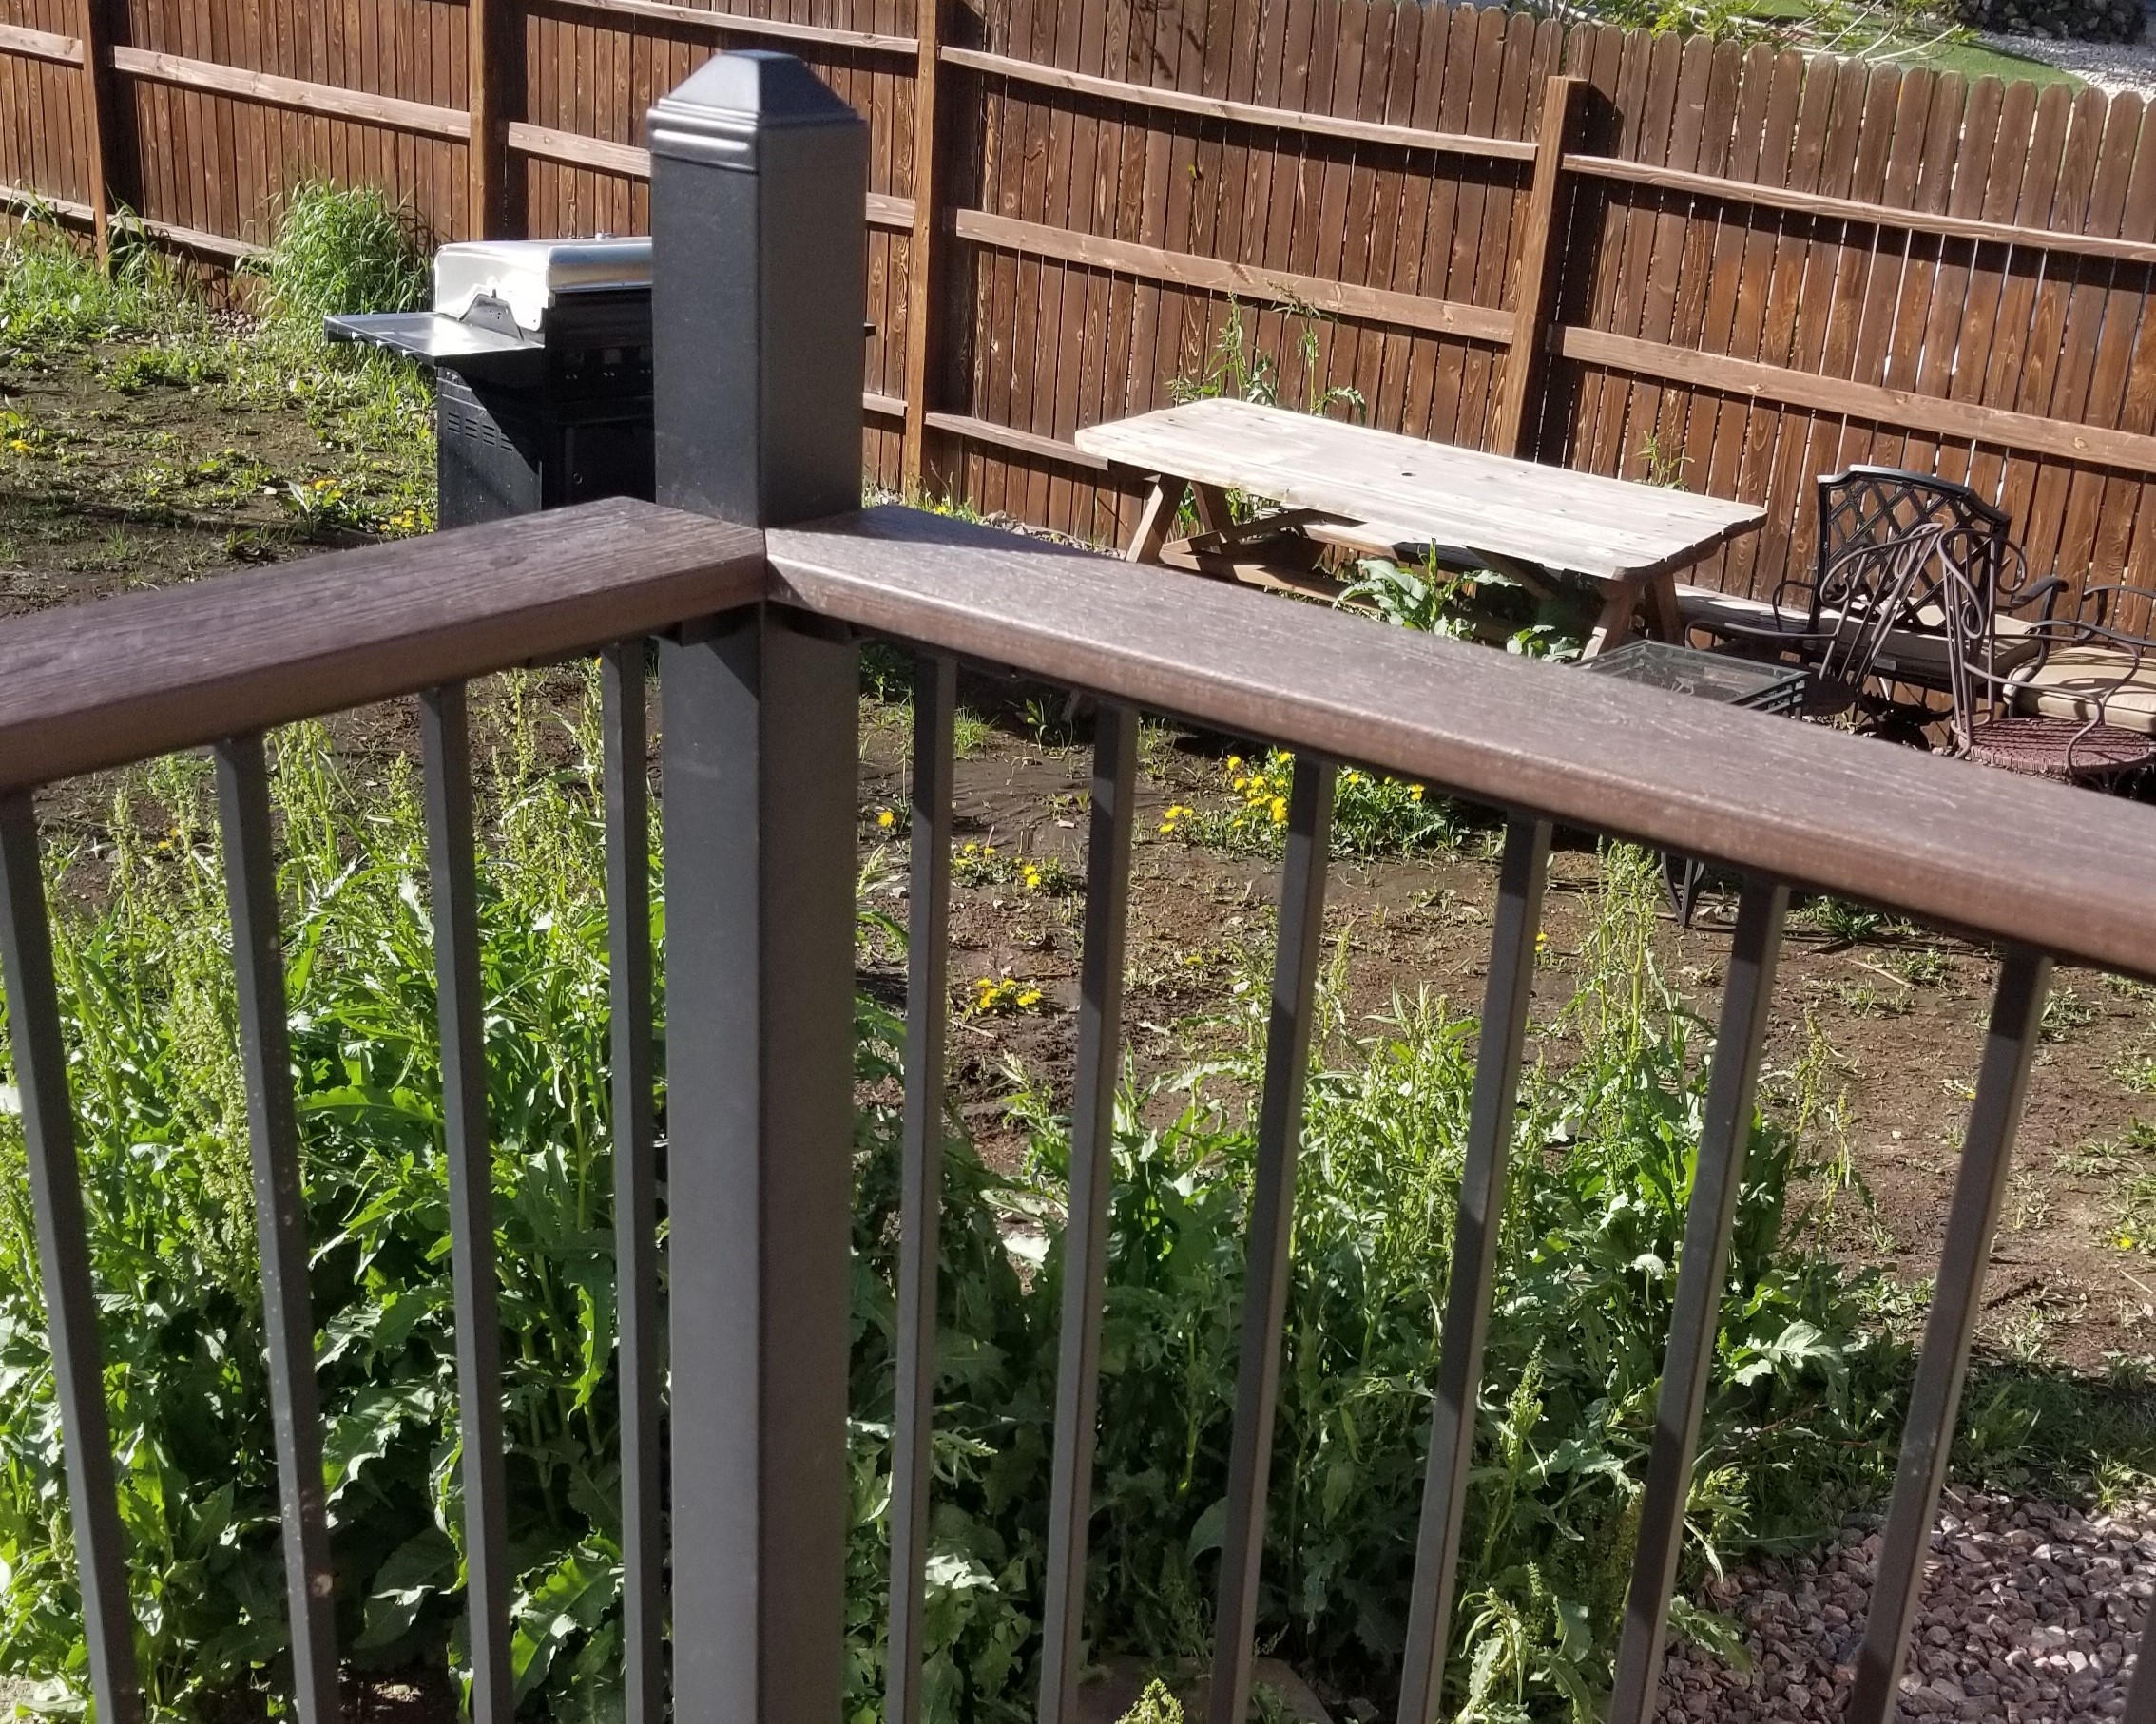 Composite deck with a Fortress Fe26 panel railing system that has raised posts, post caps, and a composite drink cap installed lower than the post height.